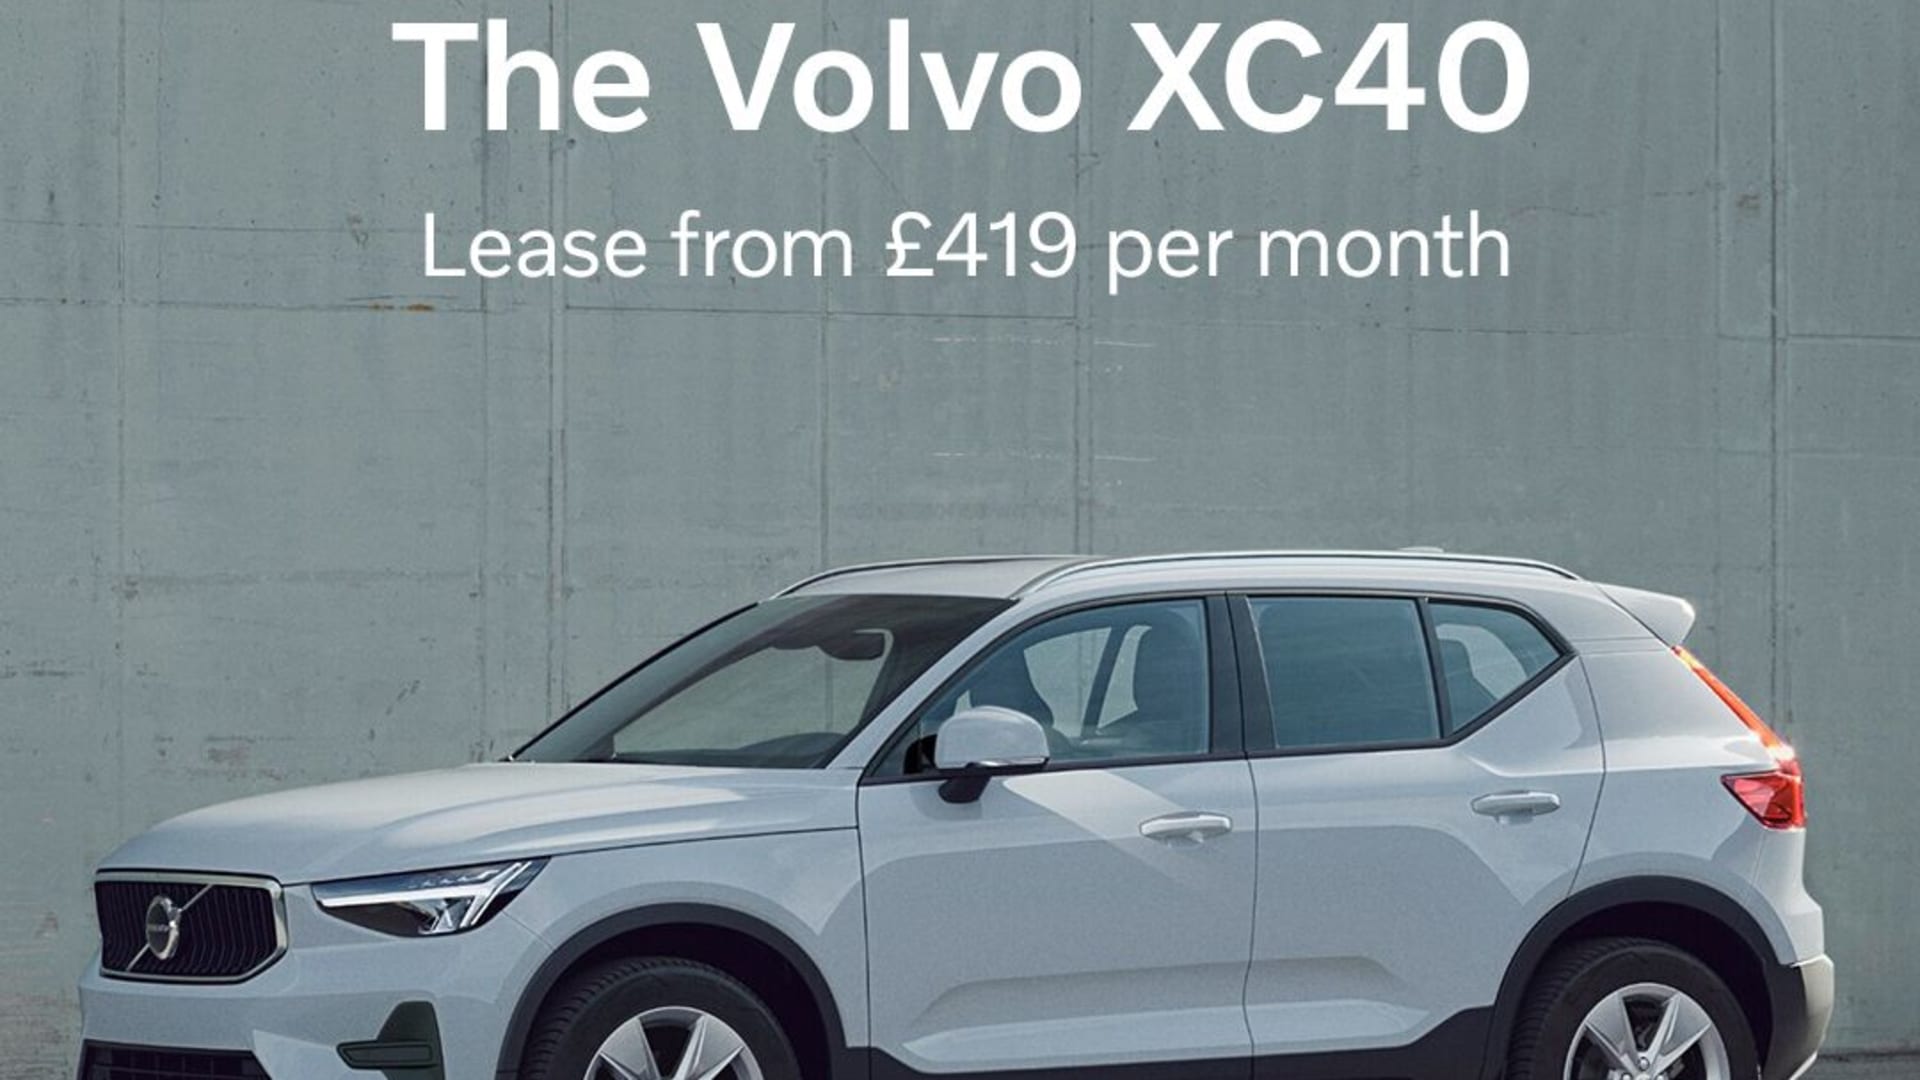 XC40 Lease Offer